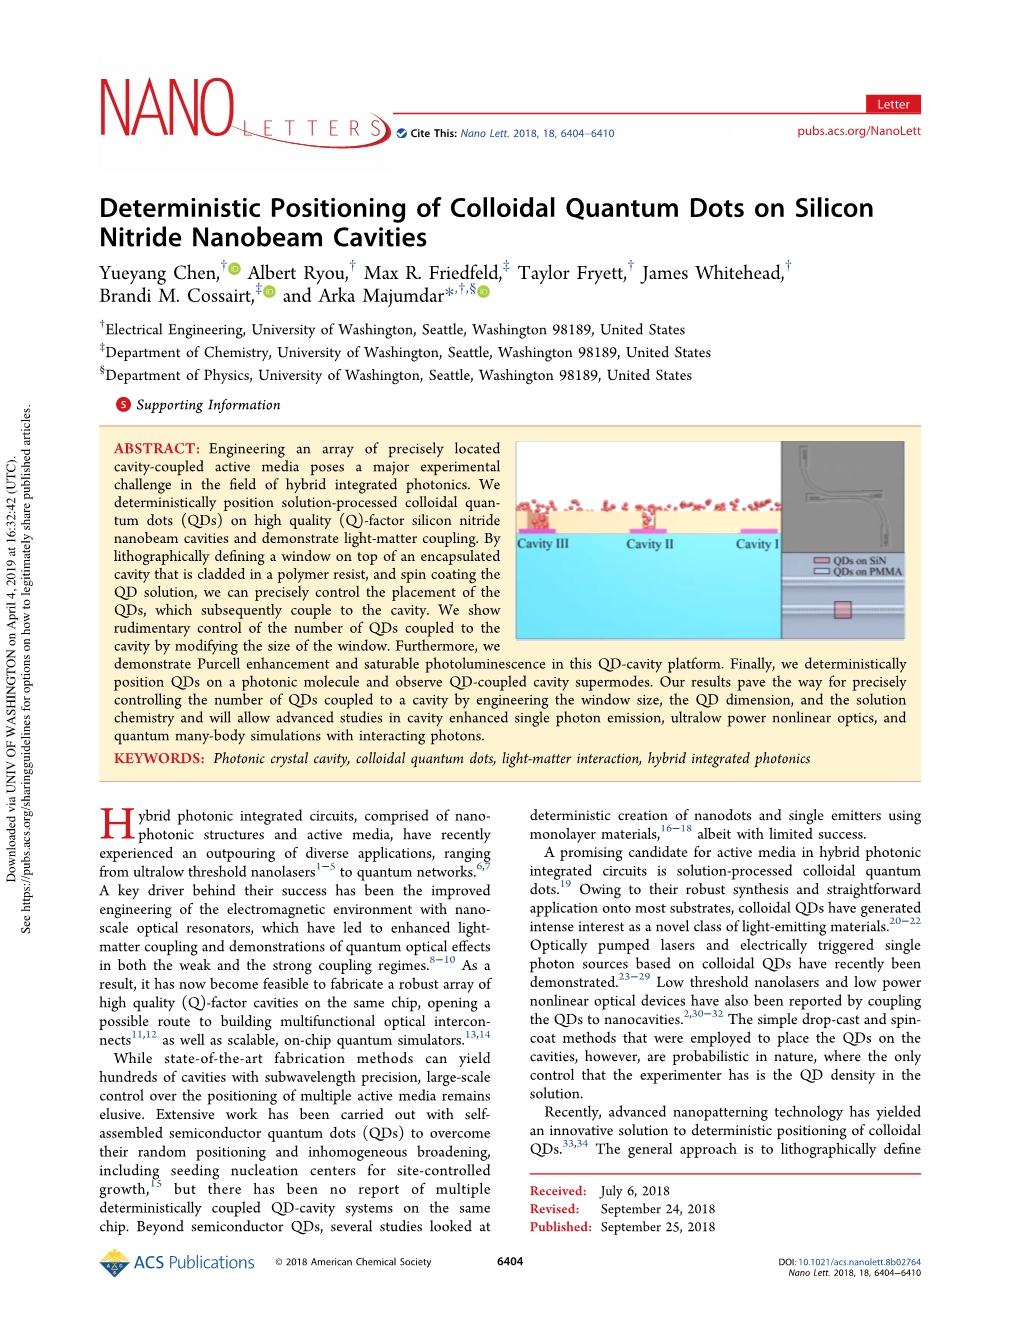 Deterministic Positioning of Colloidal Quantum Dots on Silicon Nitride Nanobeam Cavities Yueyang Chen,† Albert Ryou,† Max R